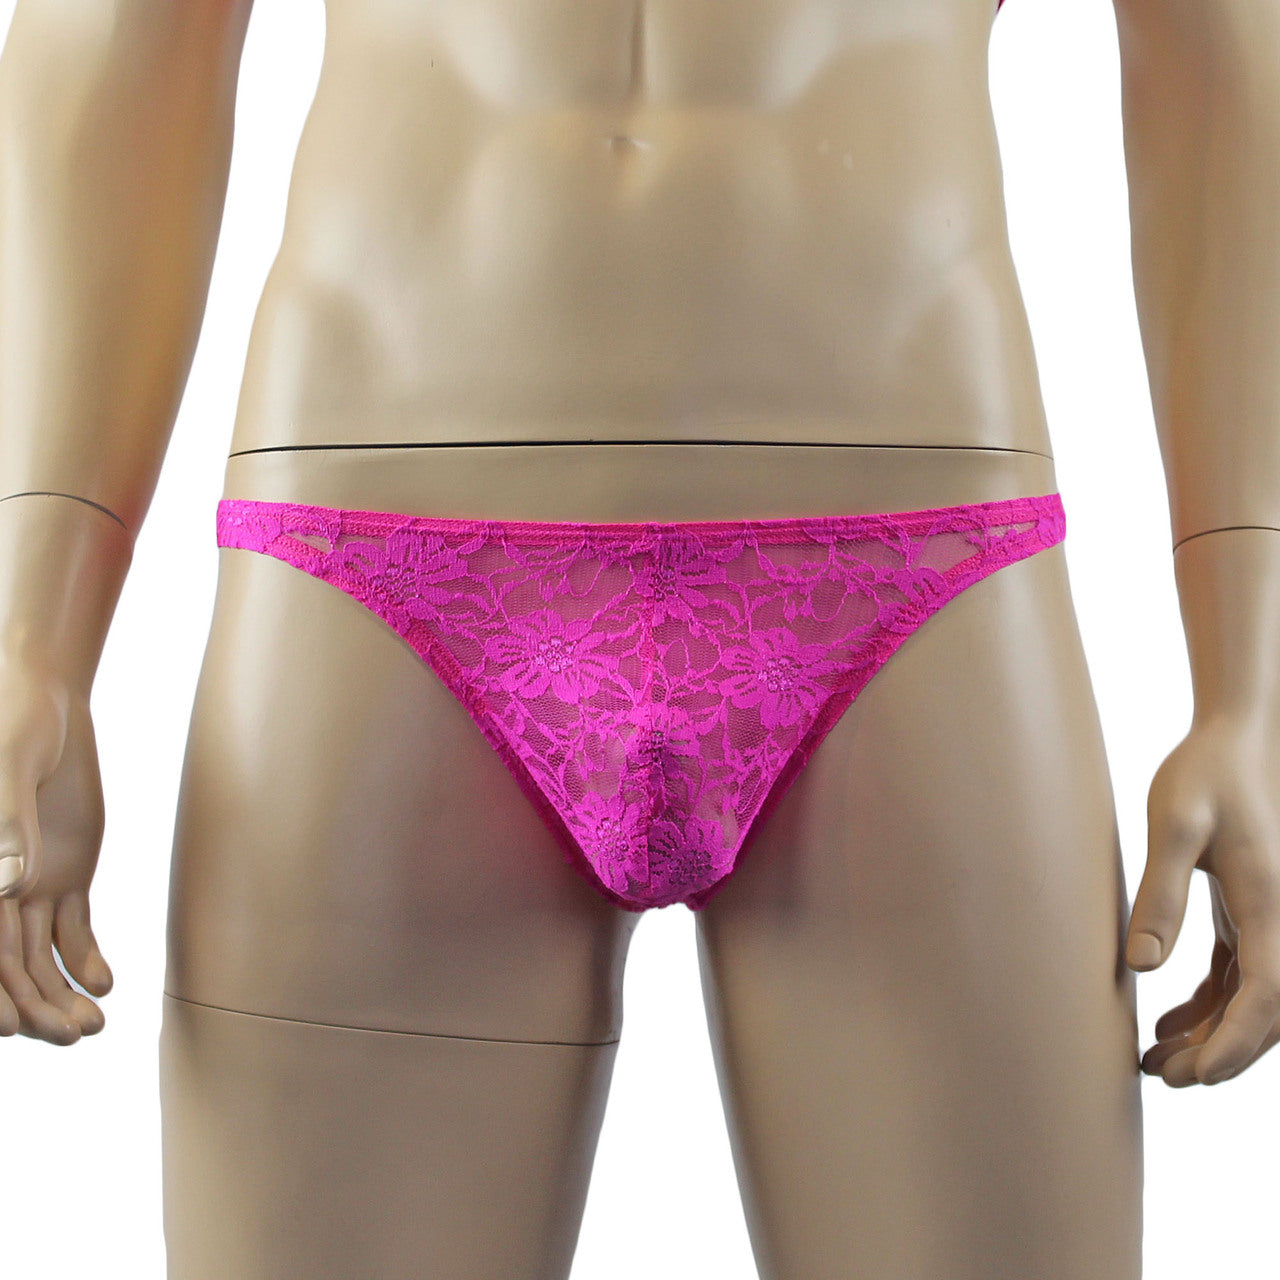 LAST ORDERS - Mens Sexy Lingerie Lace Thong G string Neon Pink